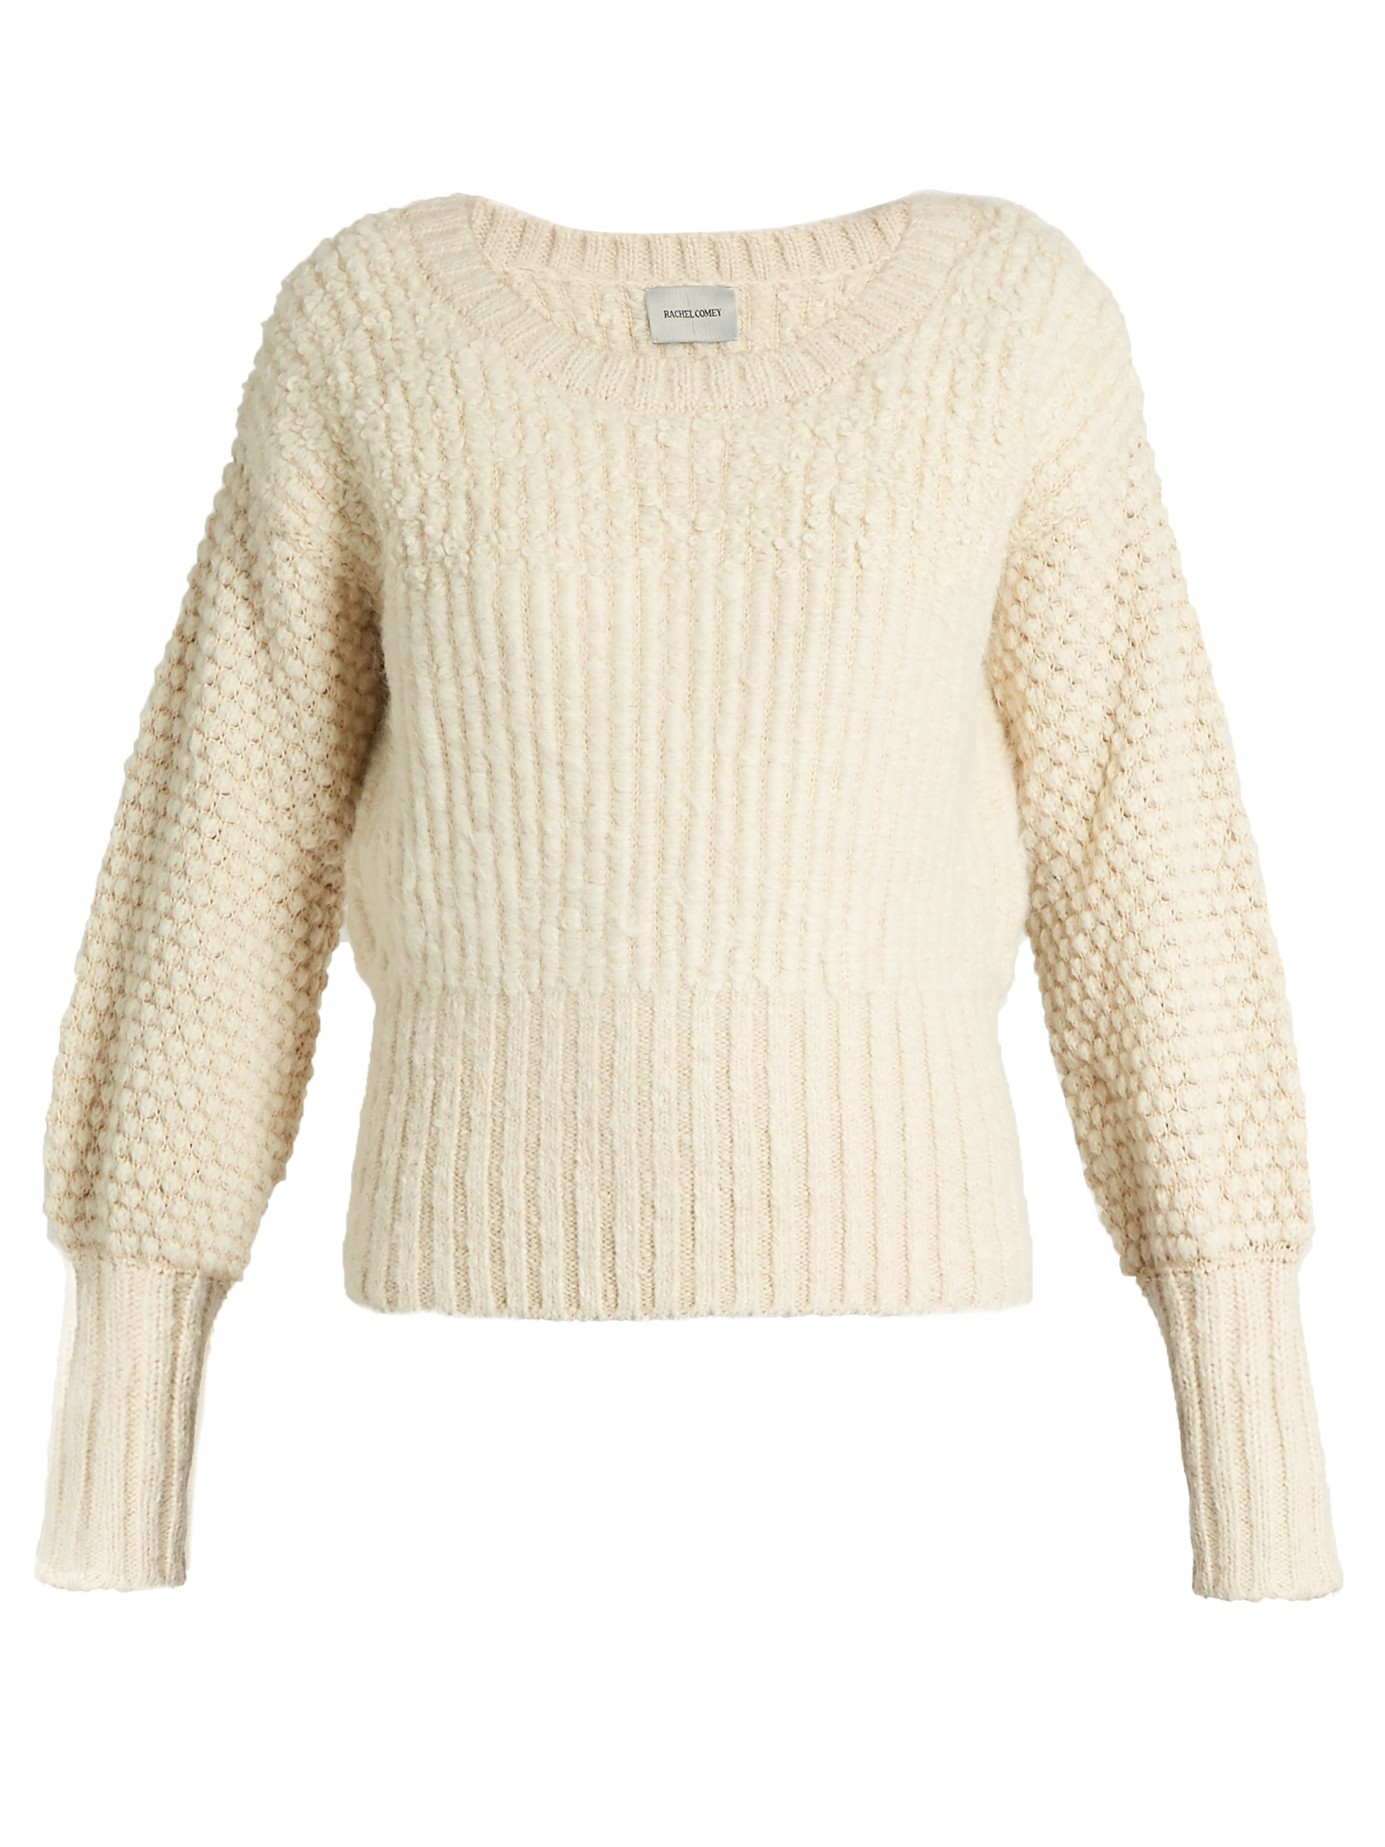 Lyst - Rachel Comey Sylvan Knitted Sweater in White